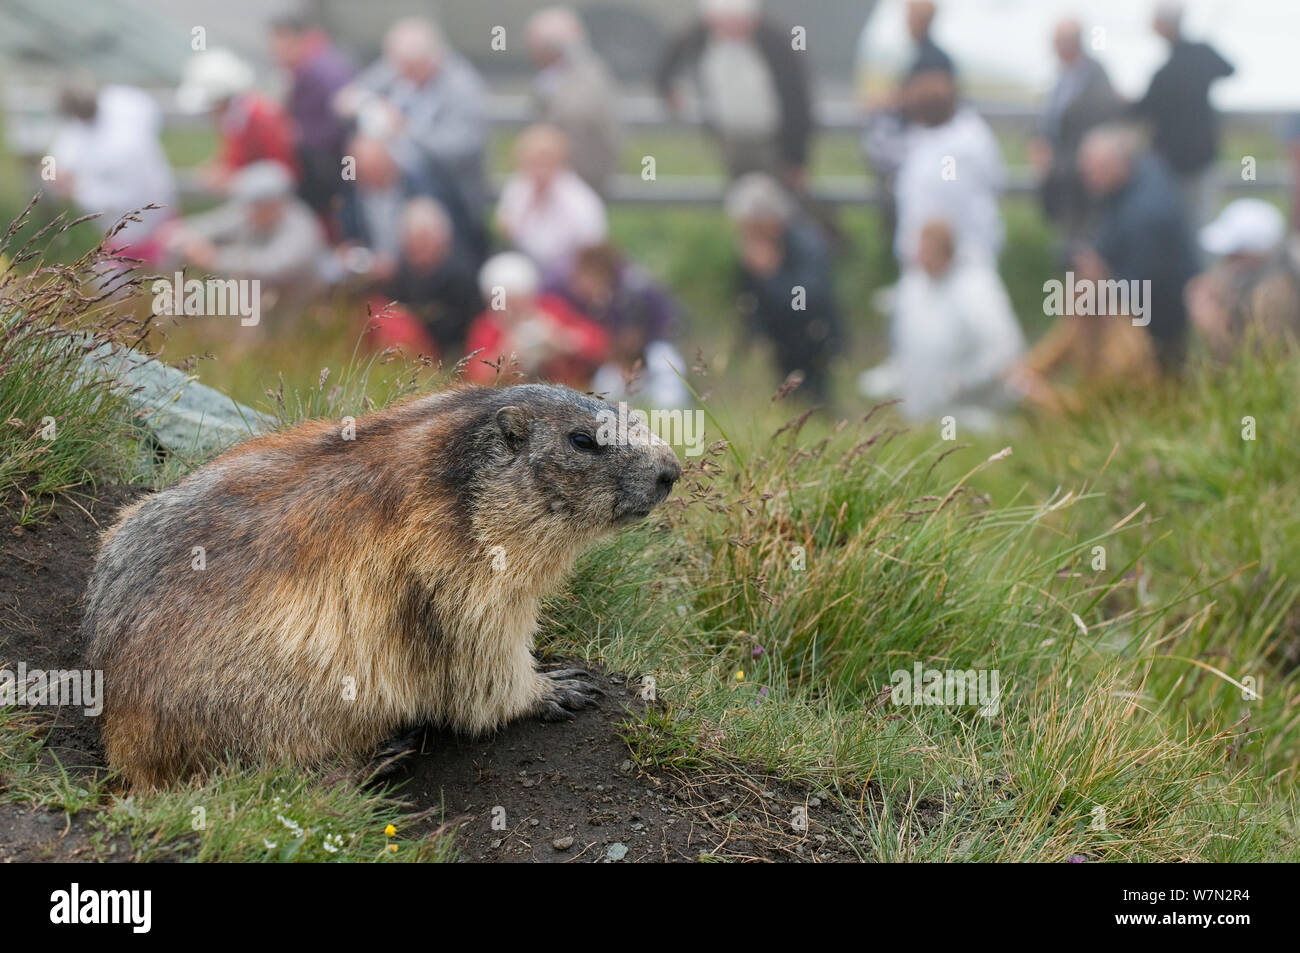 Alpine marmot (Marmota marmota) at entrance to burrow with people in the background, Hohe Tauern National Park, Austria, July Stock Photo